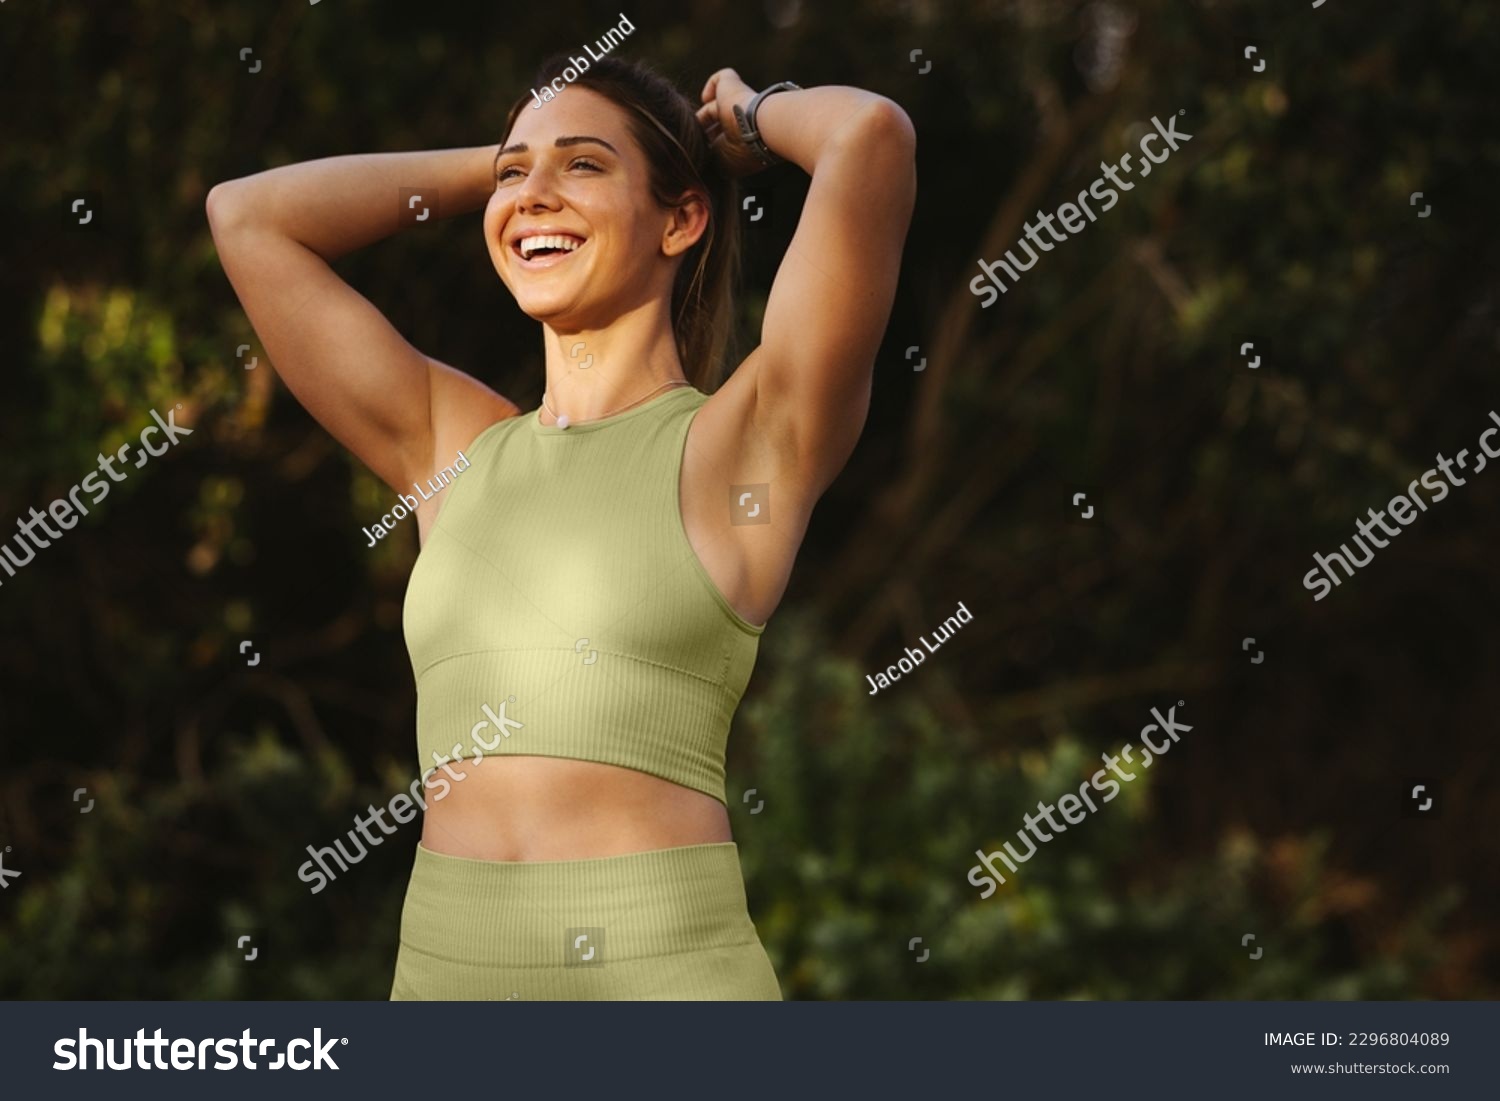 Woman warming up for a morning workout outdoors. Happy sports woman tying her hair and preparing for yoga. Fit woman standing against a nature background. #2296804089